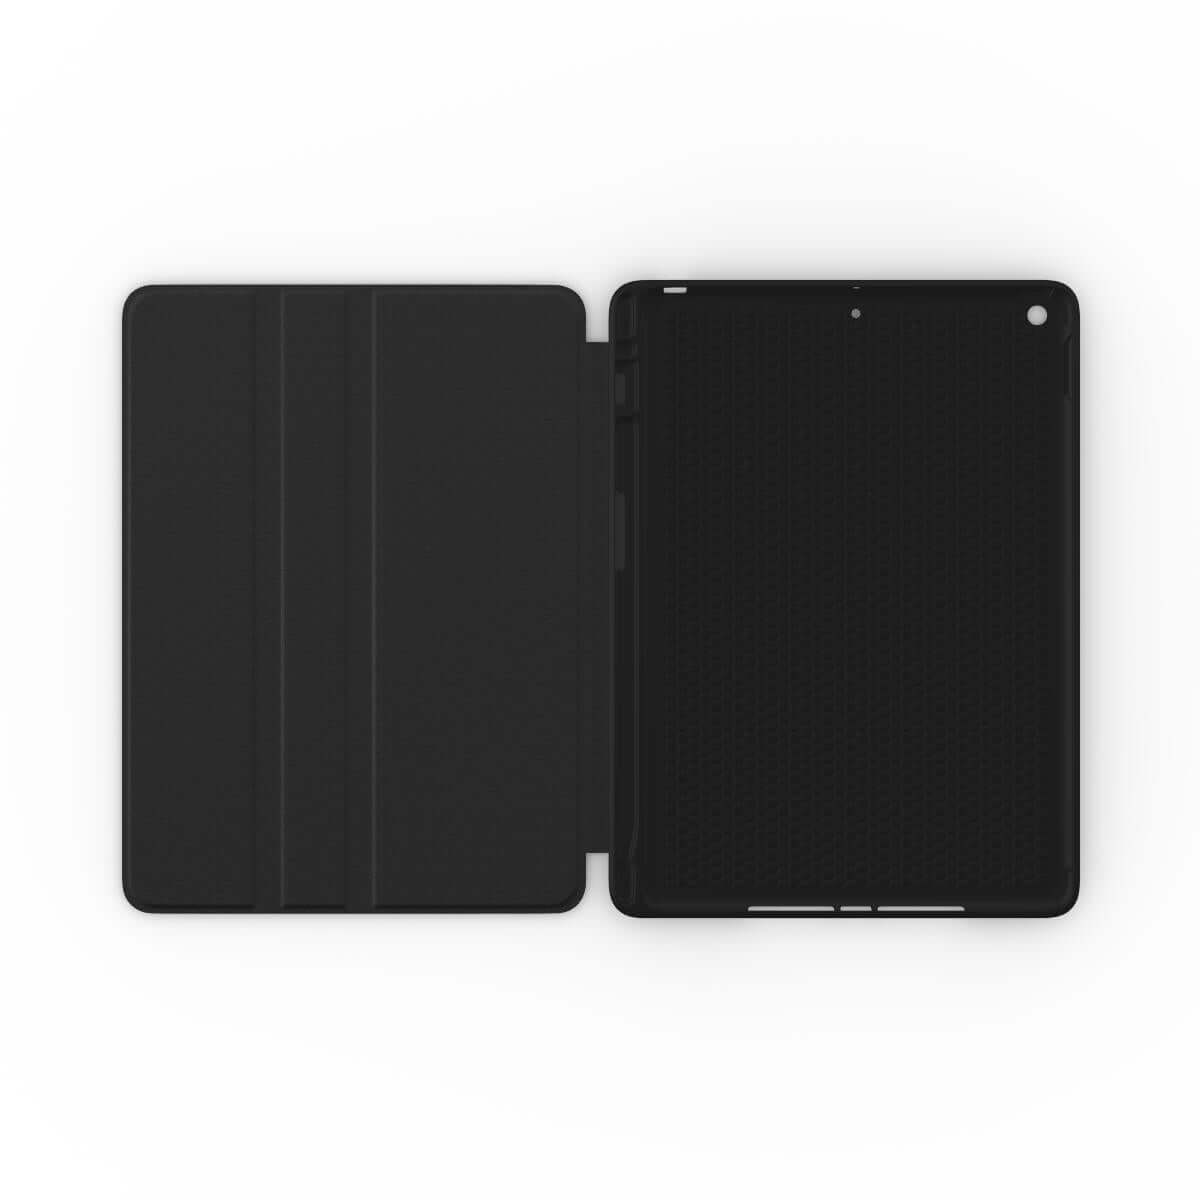 Dnipro Is Offices iPad Cover